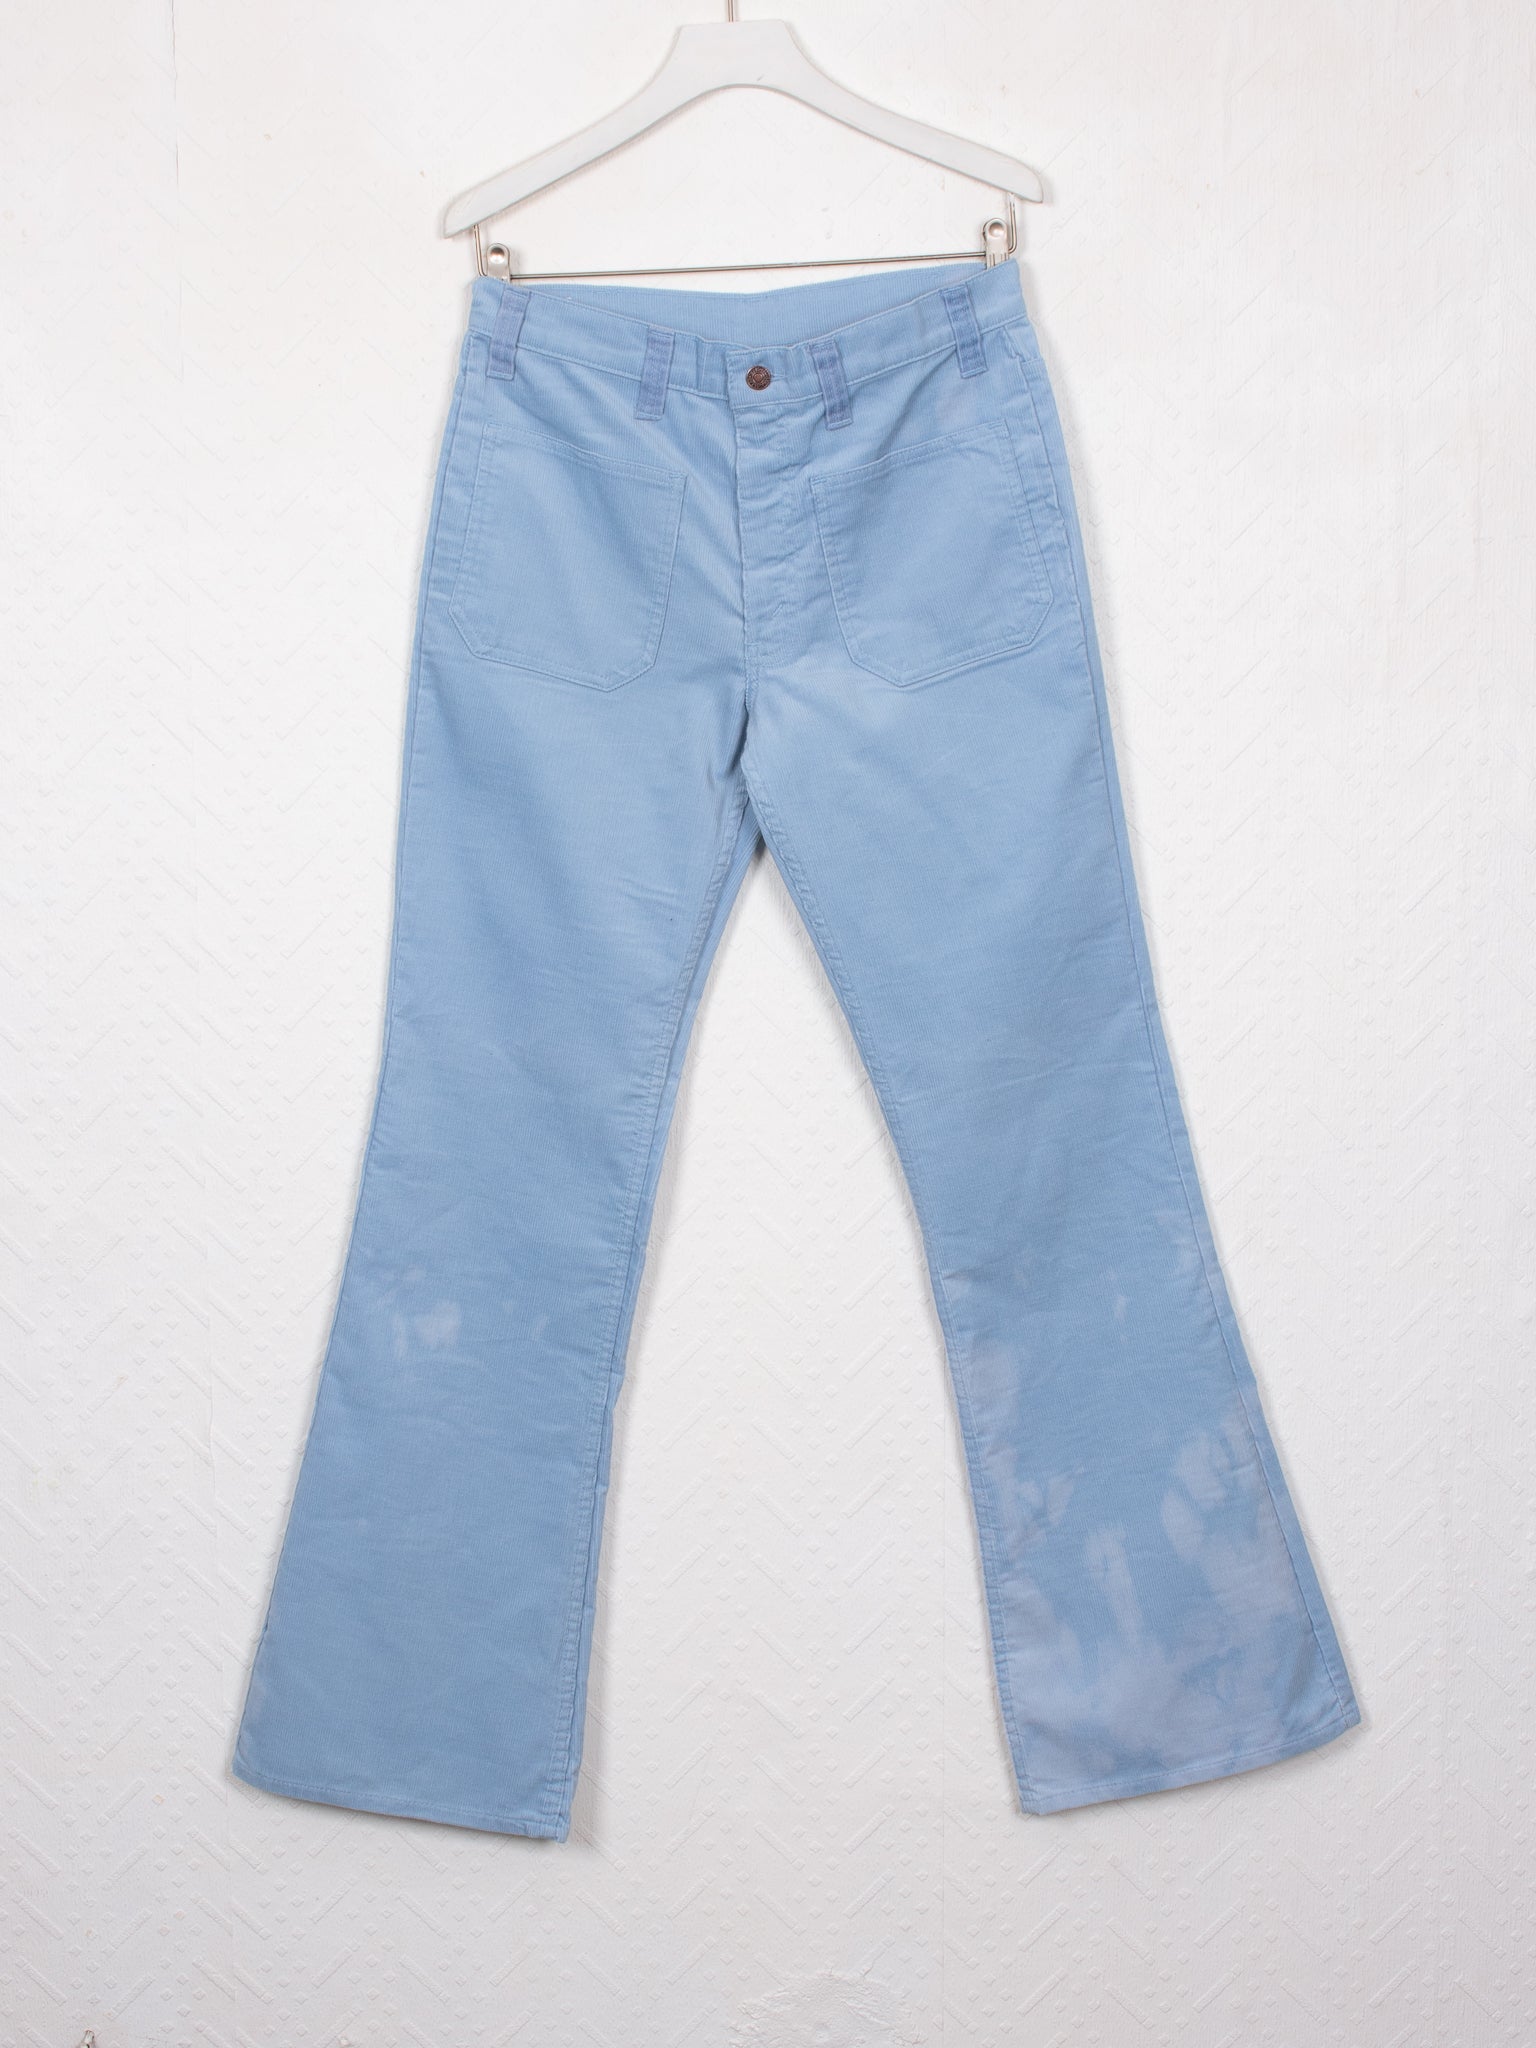 pants & trousers 60s Levi's 609 Cord Flares - W32